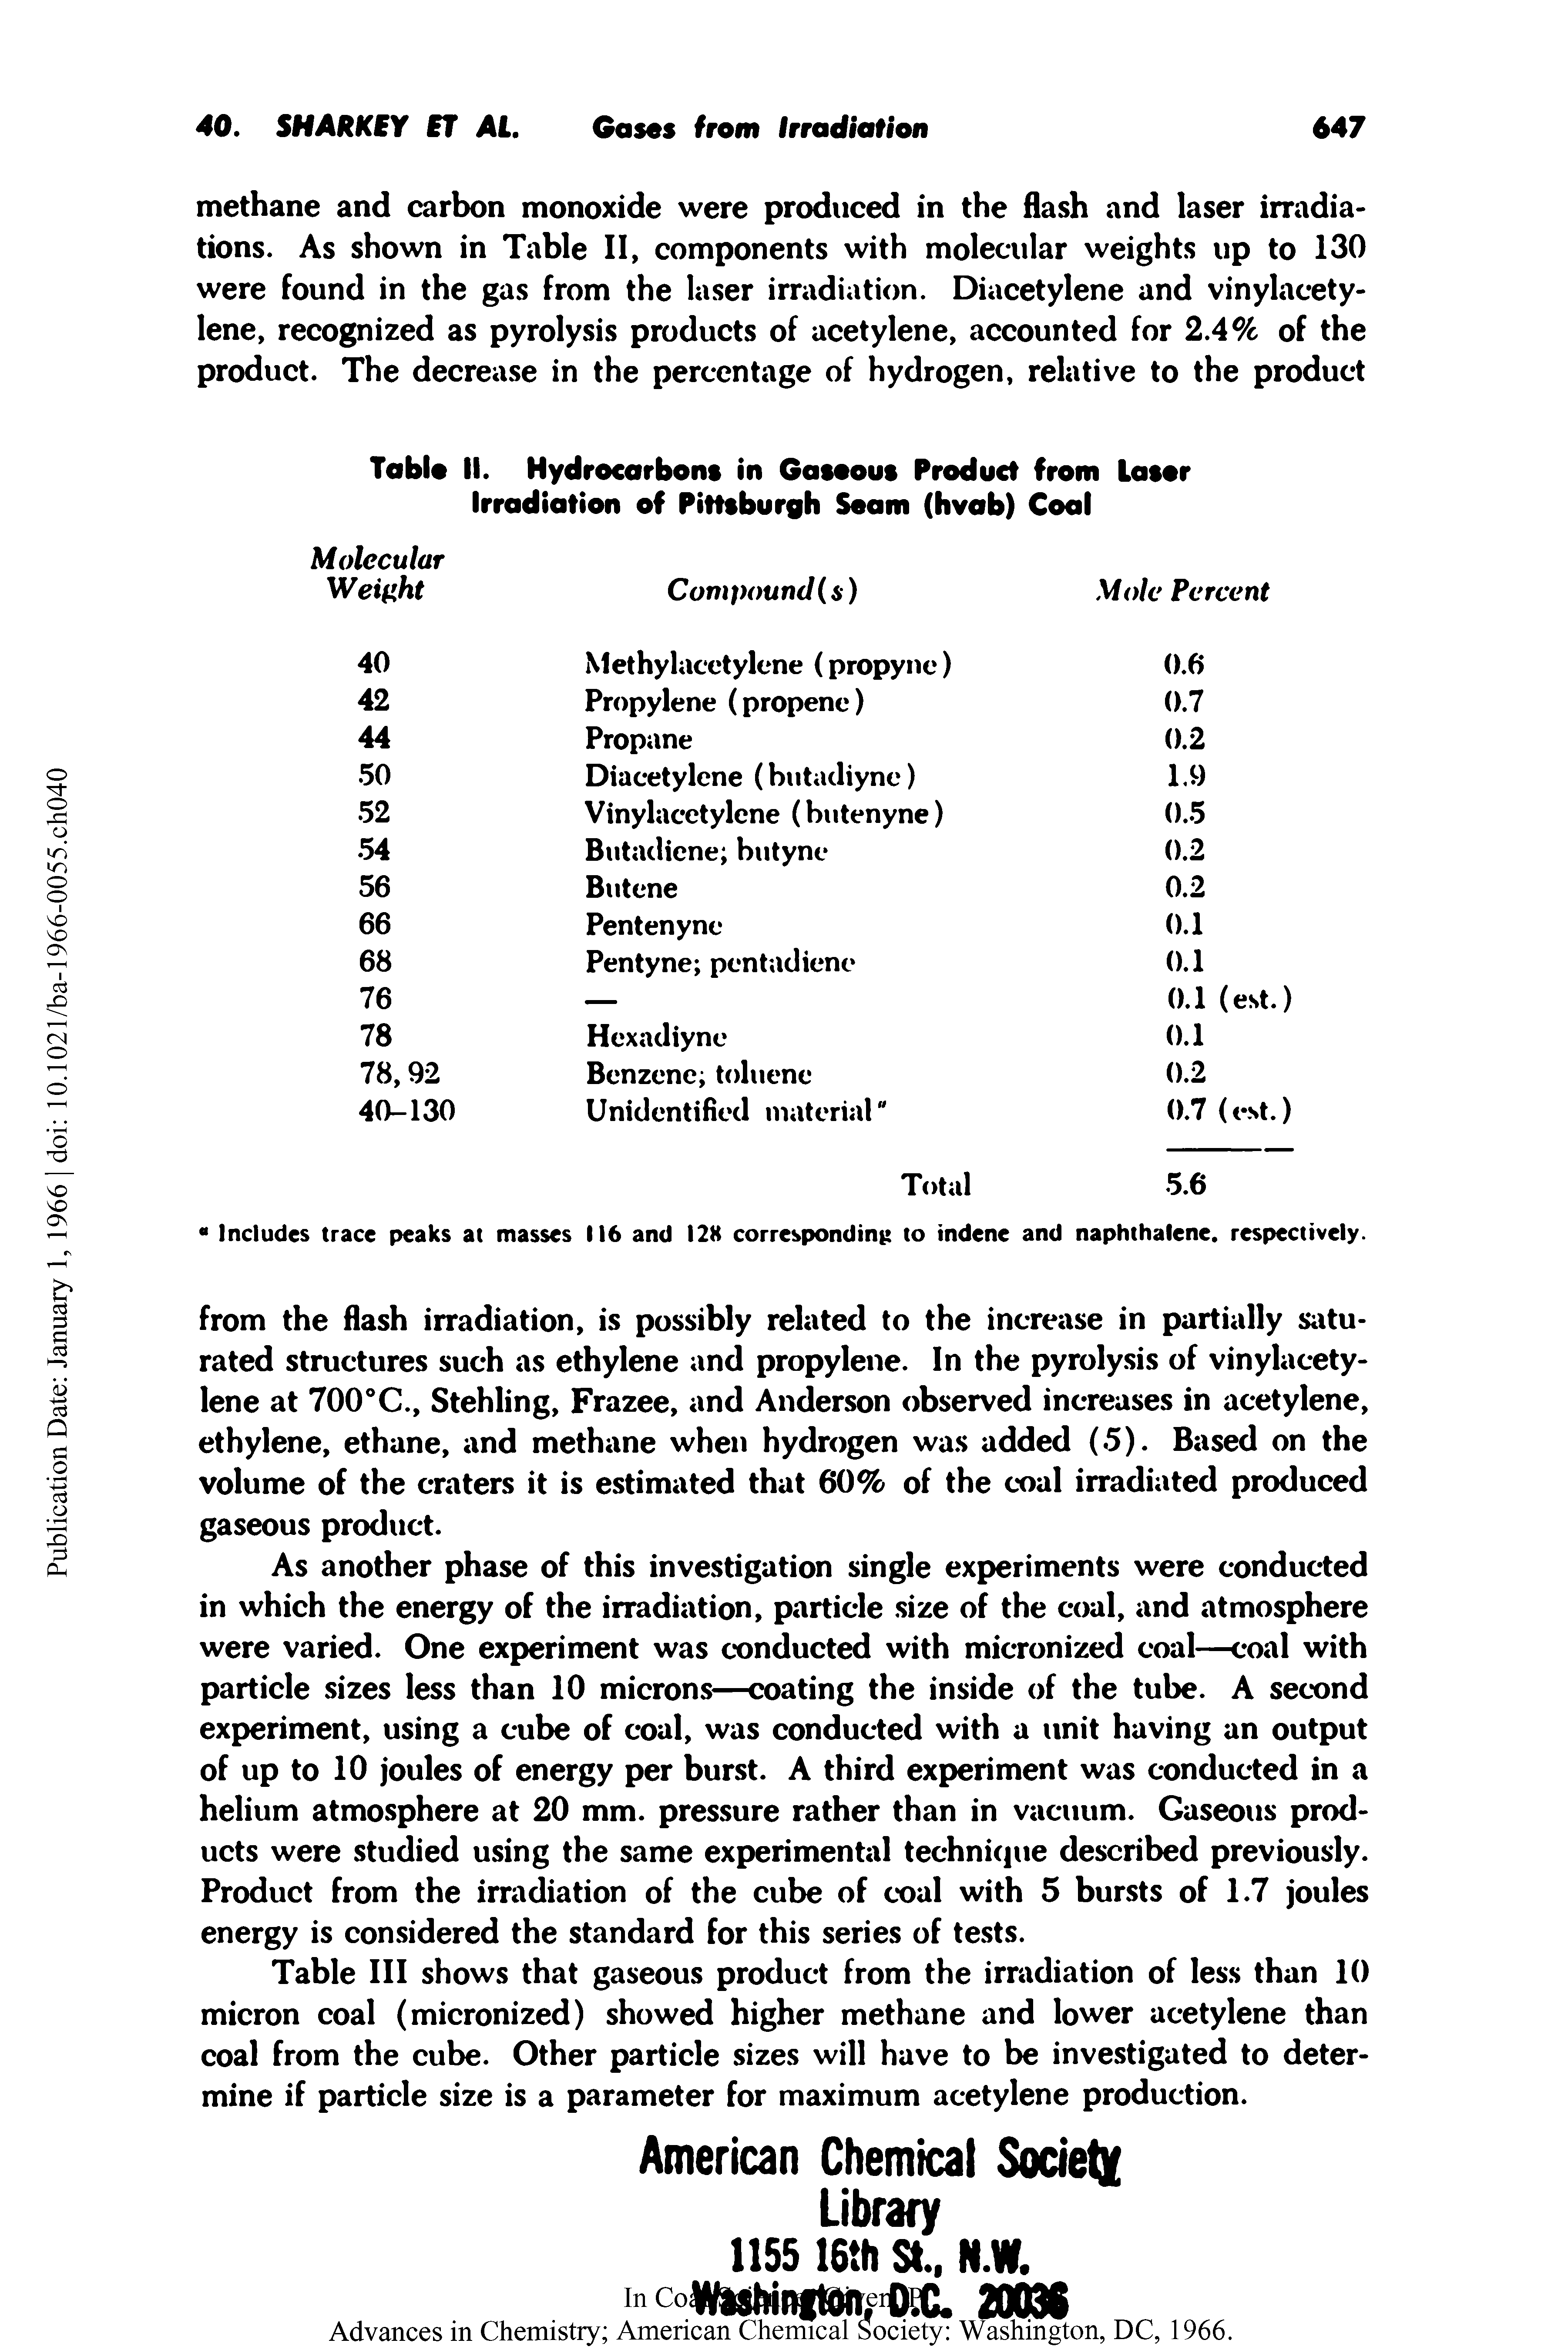 Table III shows that gaseous product from the irradiation of less than 10 micron coal (micronized) showed higher methane and lower acetylene than coal from the cube. Other particle sizes will have to be investigated to determine if particle size is a parameter for maximum acetylene production.